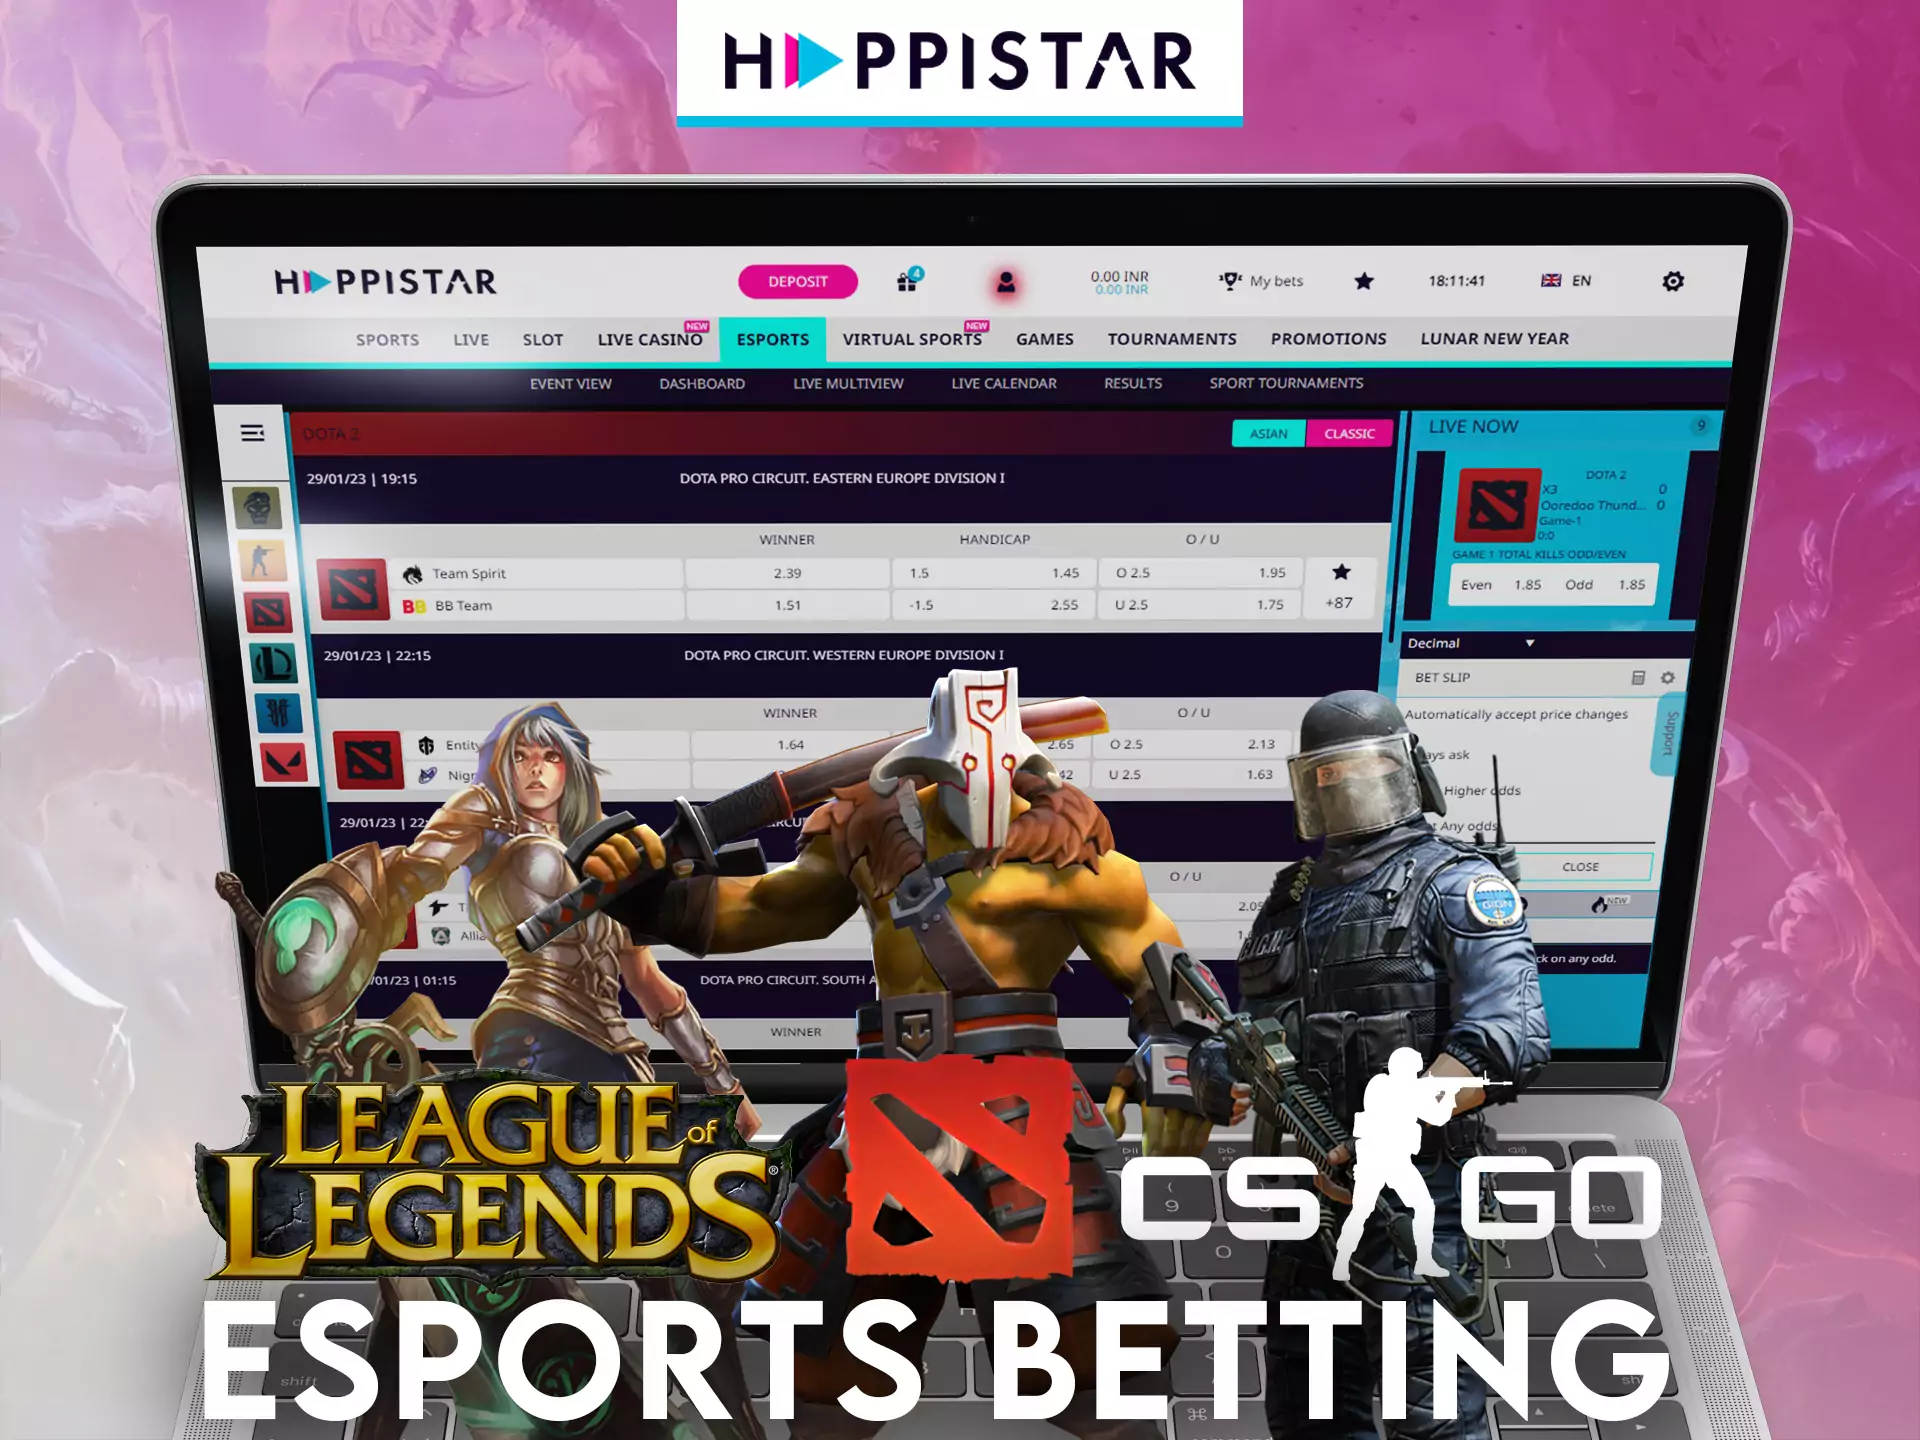 Place bets on esports events in the Happistar sportsbook.